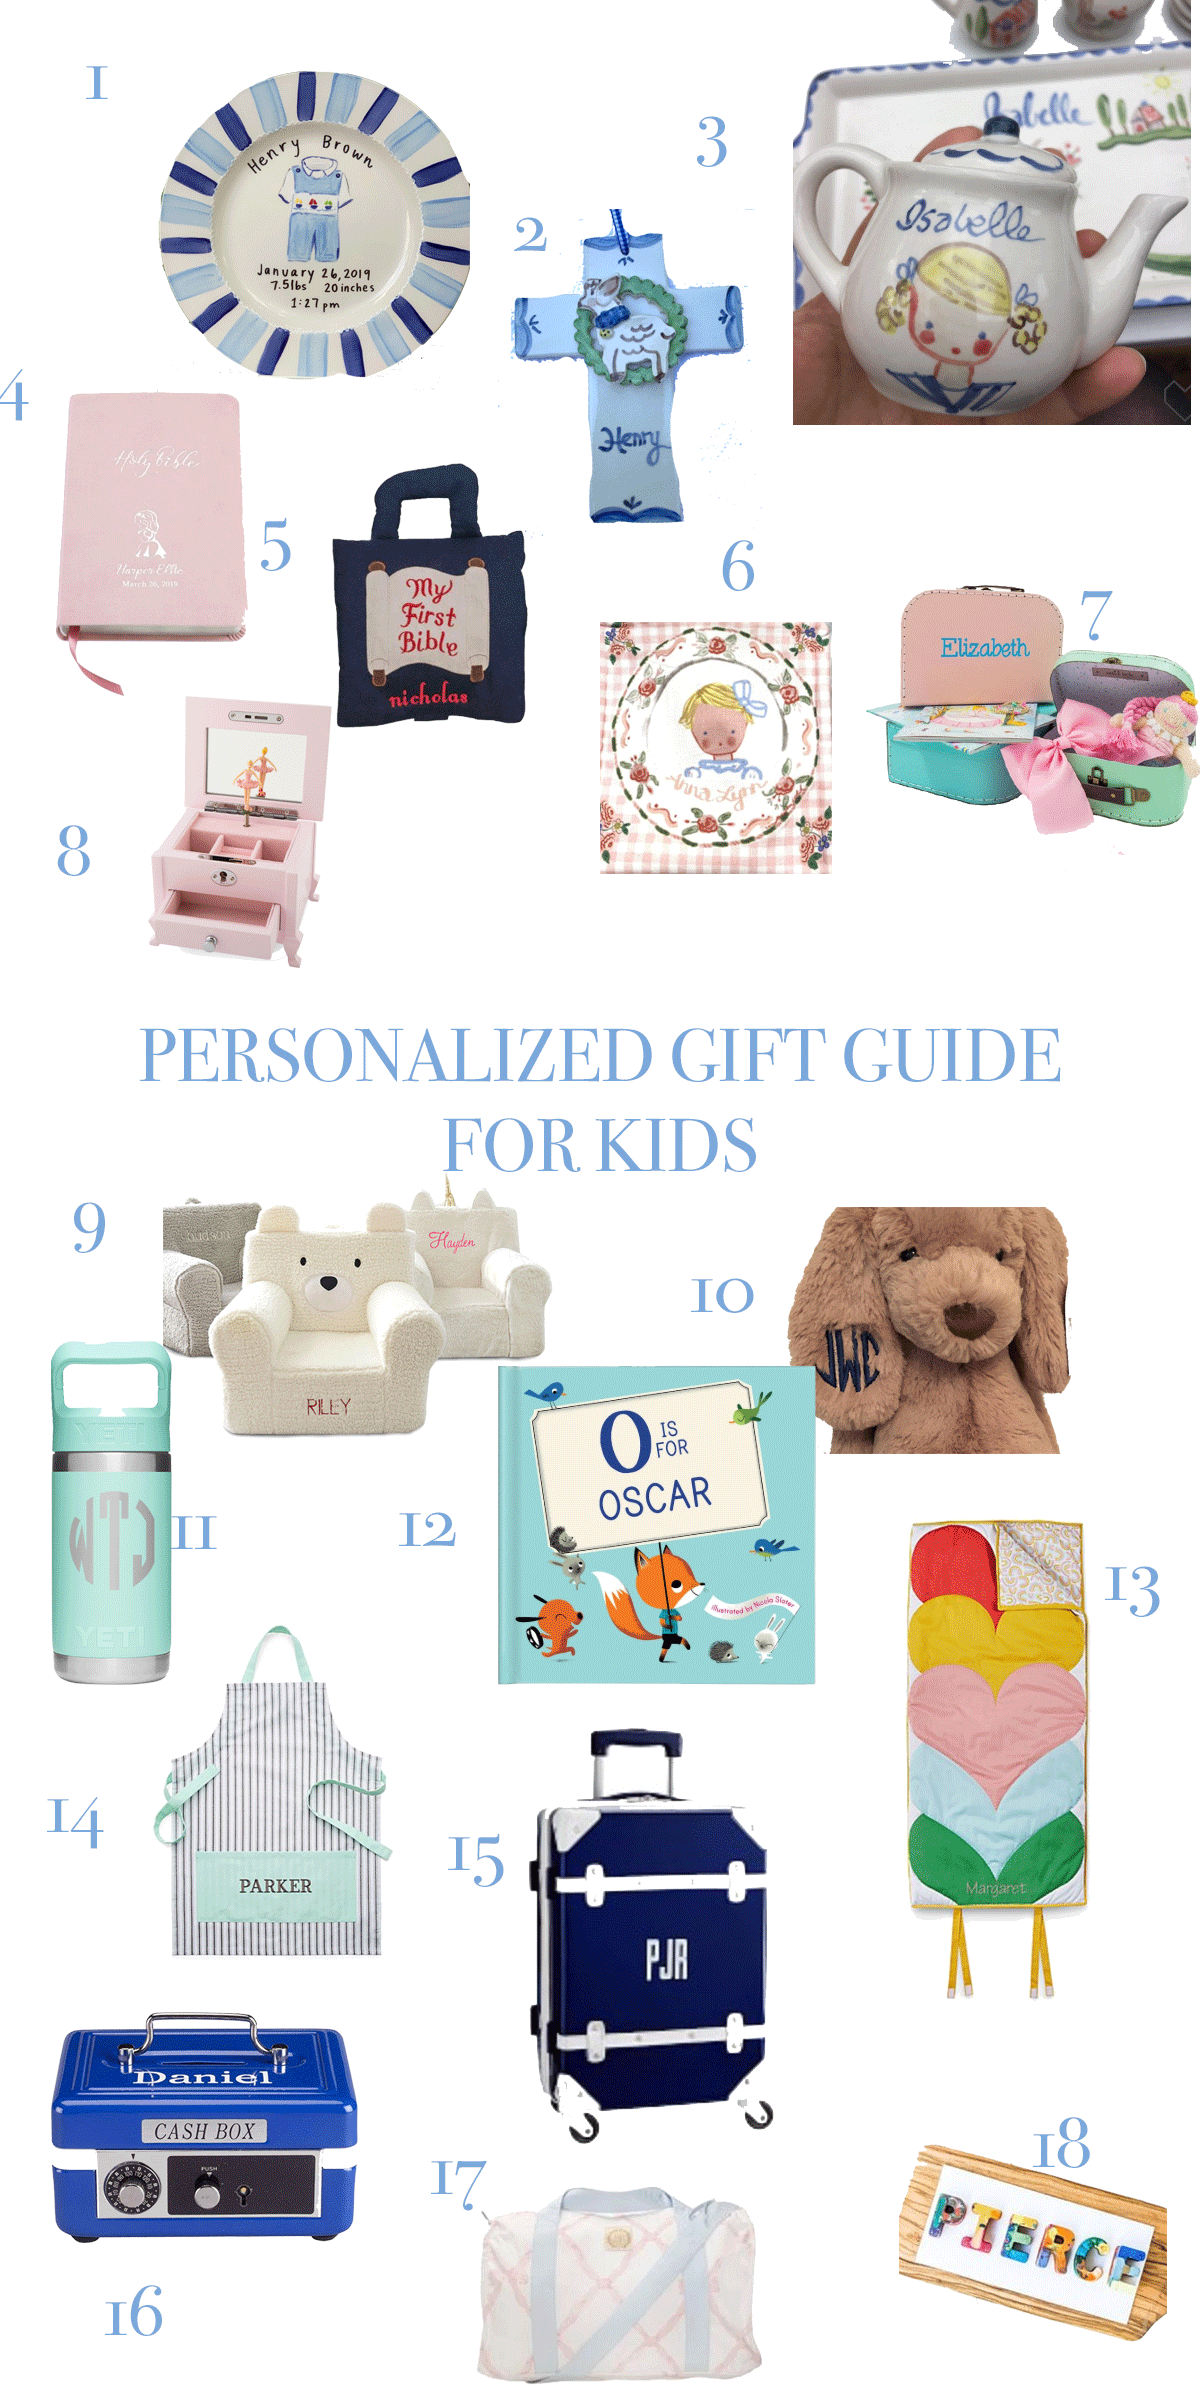 https://sarah-tucker.com/wp-content/uploads/2019/11/Personalized-gift-guide-for-babies-children-heirloom.png